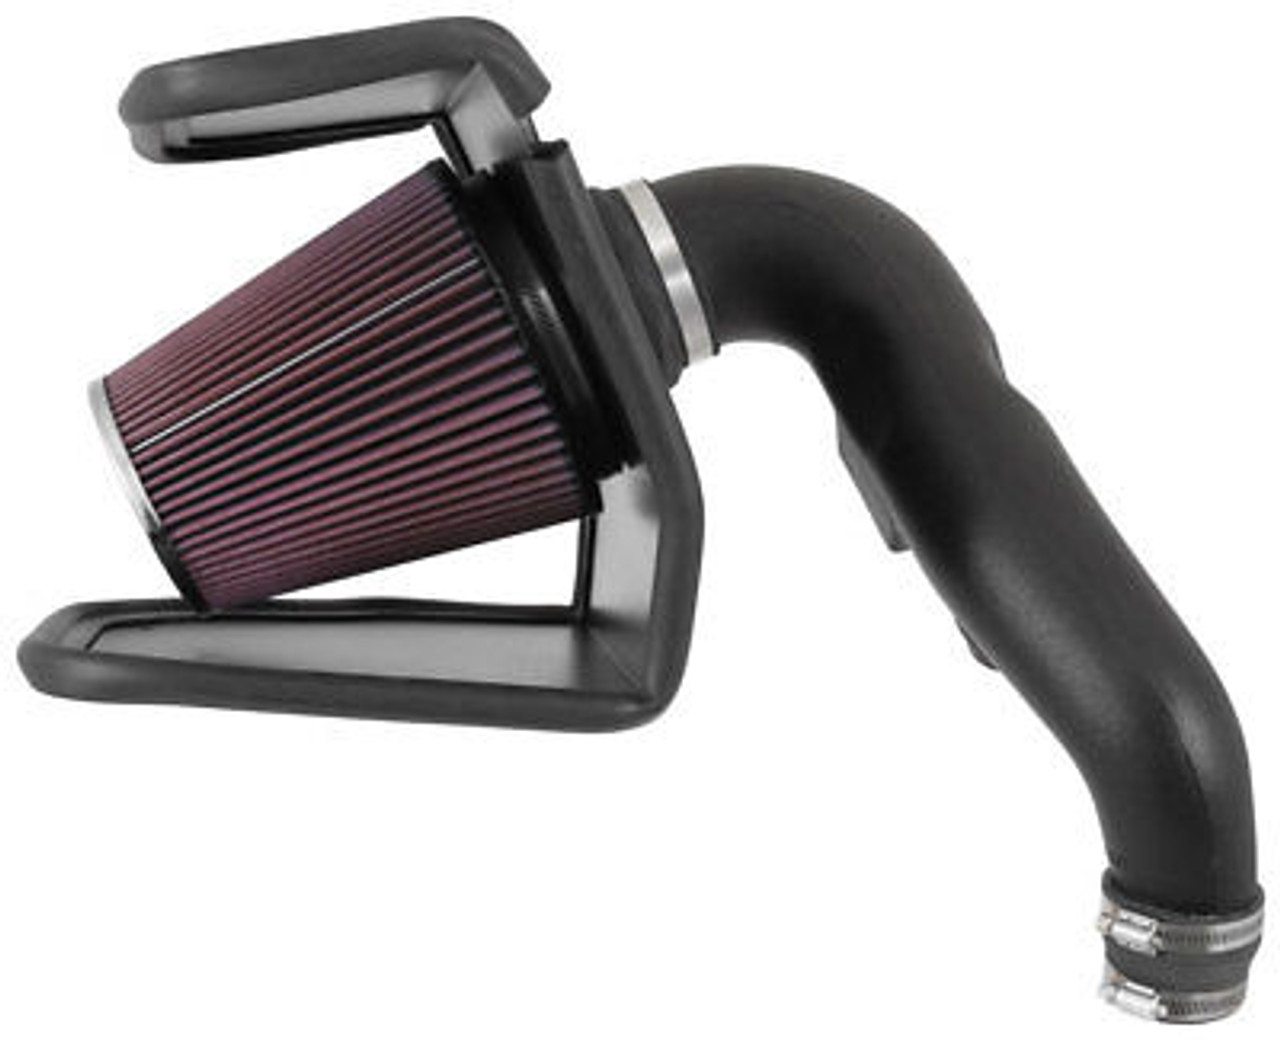 K&N COLD AIR INTAKE FOR 2016-2018 CHEVY COLORADO GMC CANYON DIESEL 2.8L 63-3095